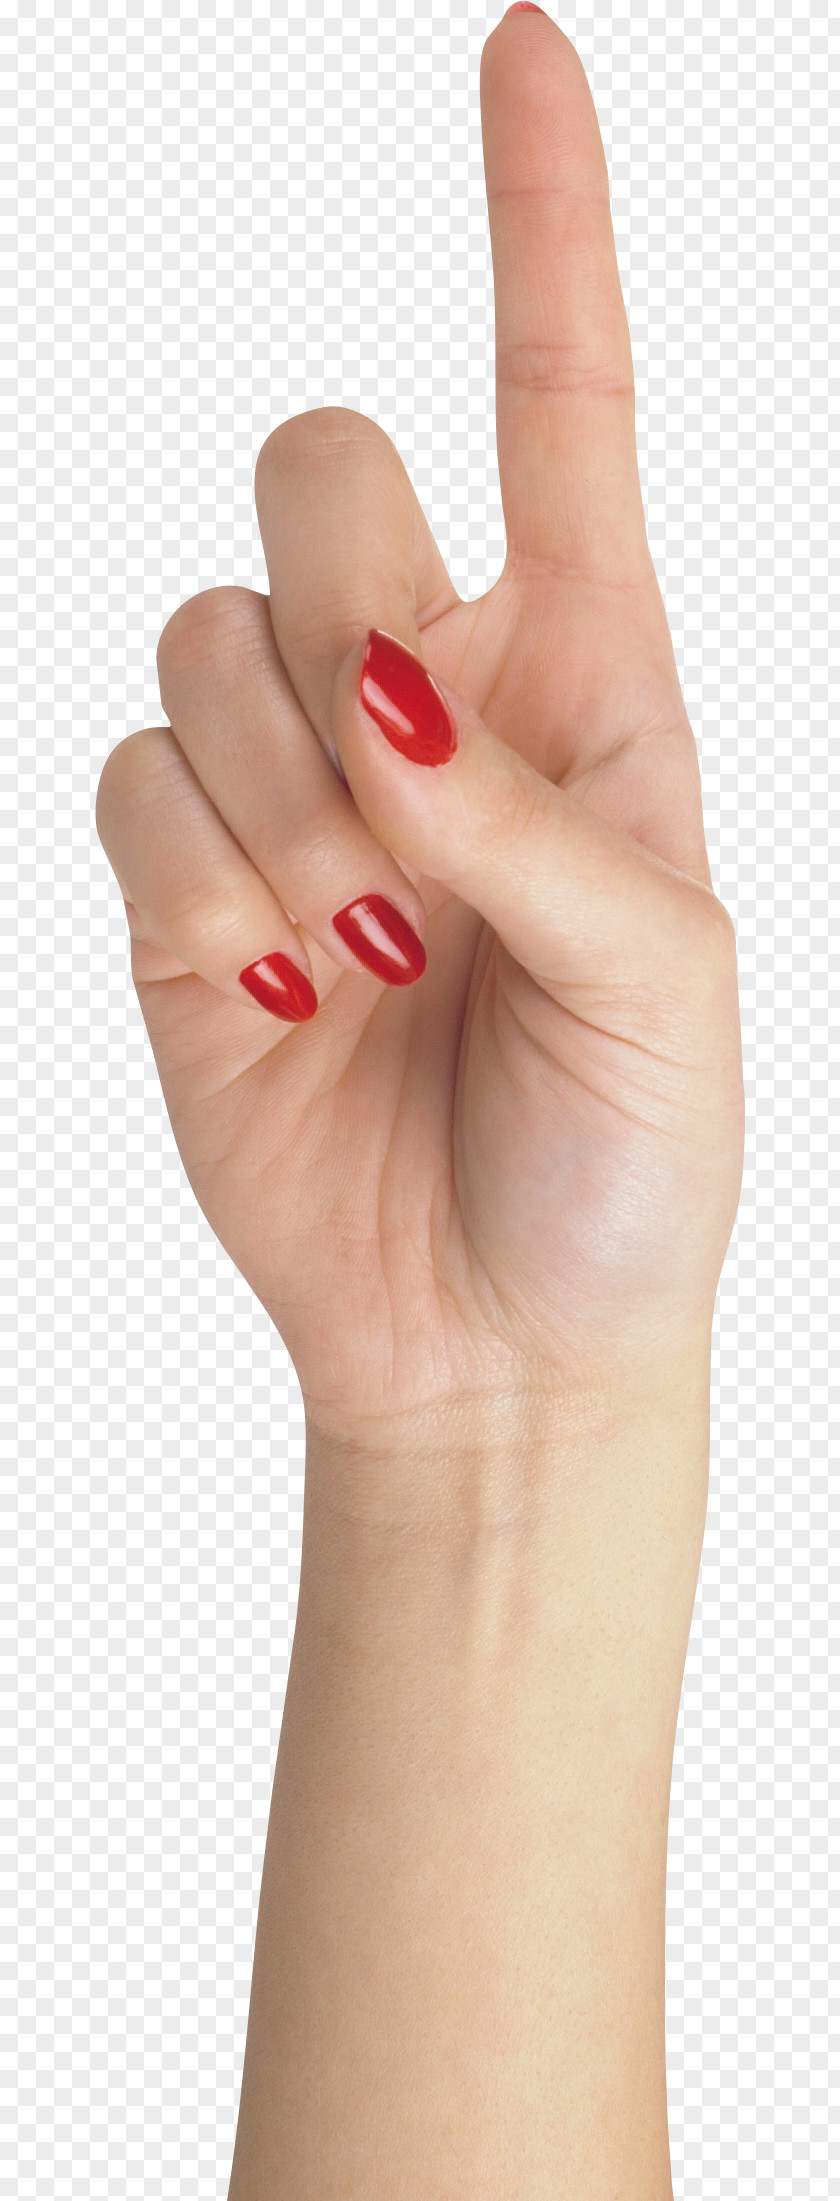 Hands , Hand Image Free Nail Finger PNG